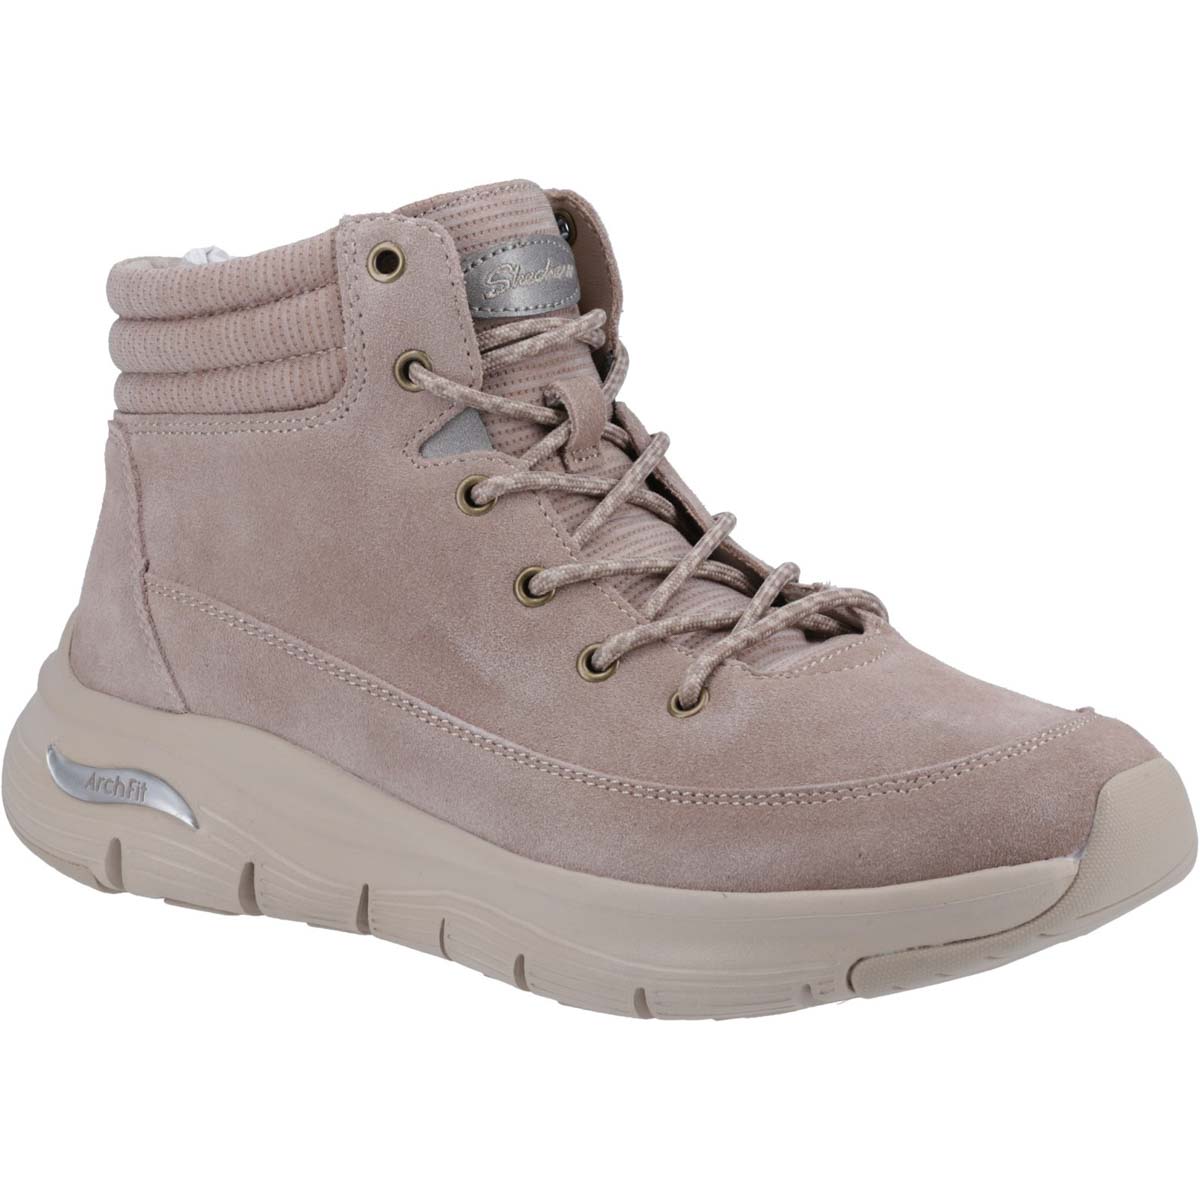 Skechers Arch Fit Smooth TPE Taupe Womens ankle boots